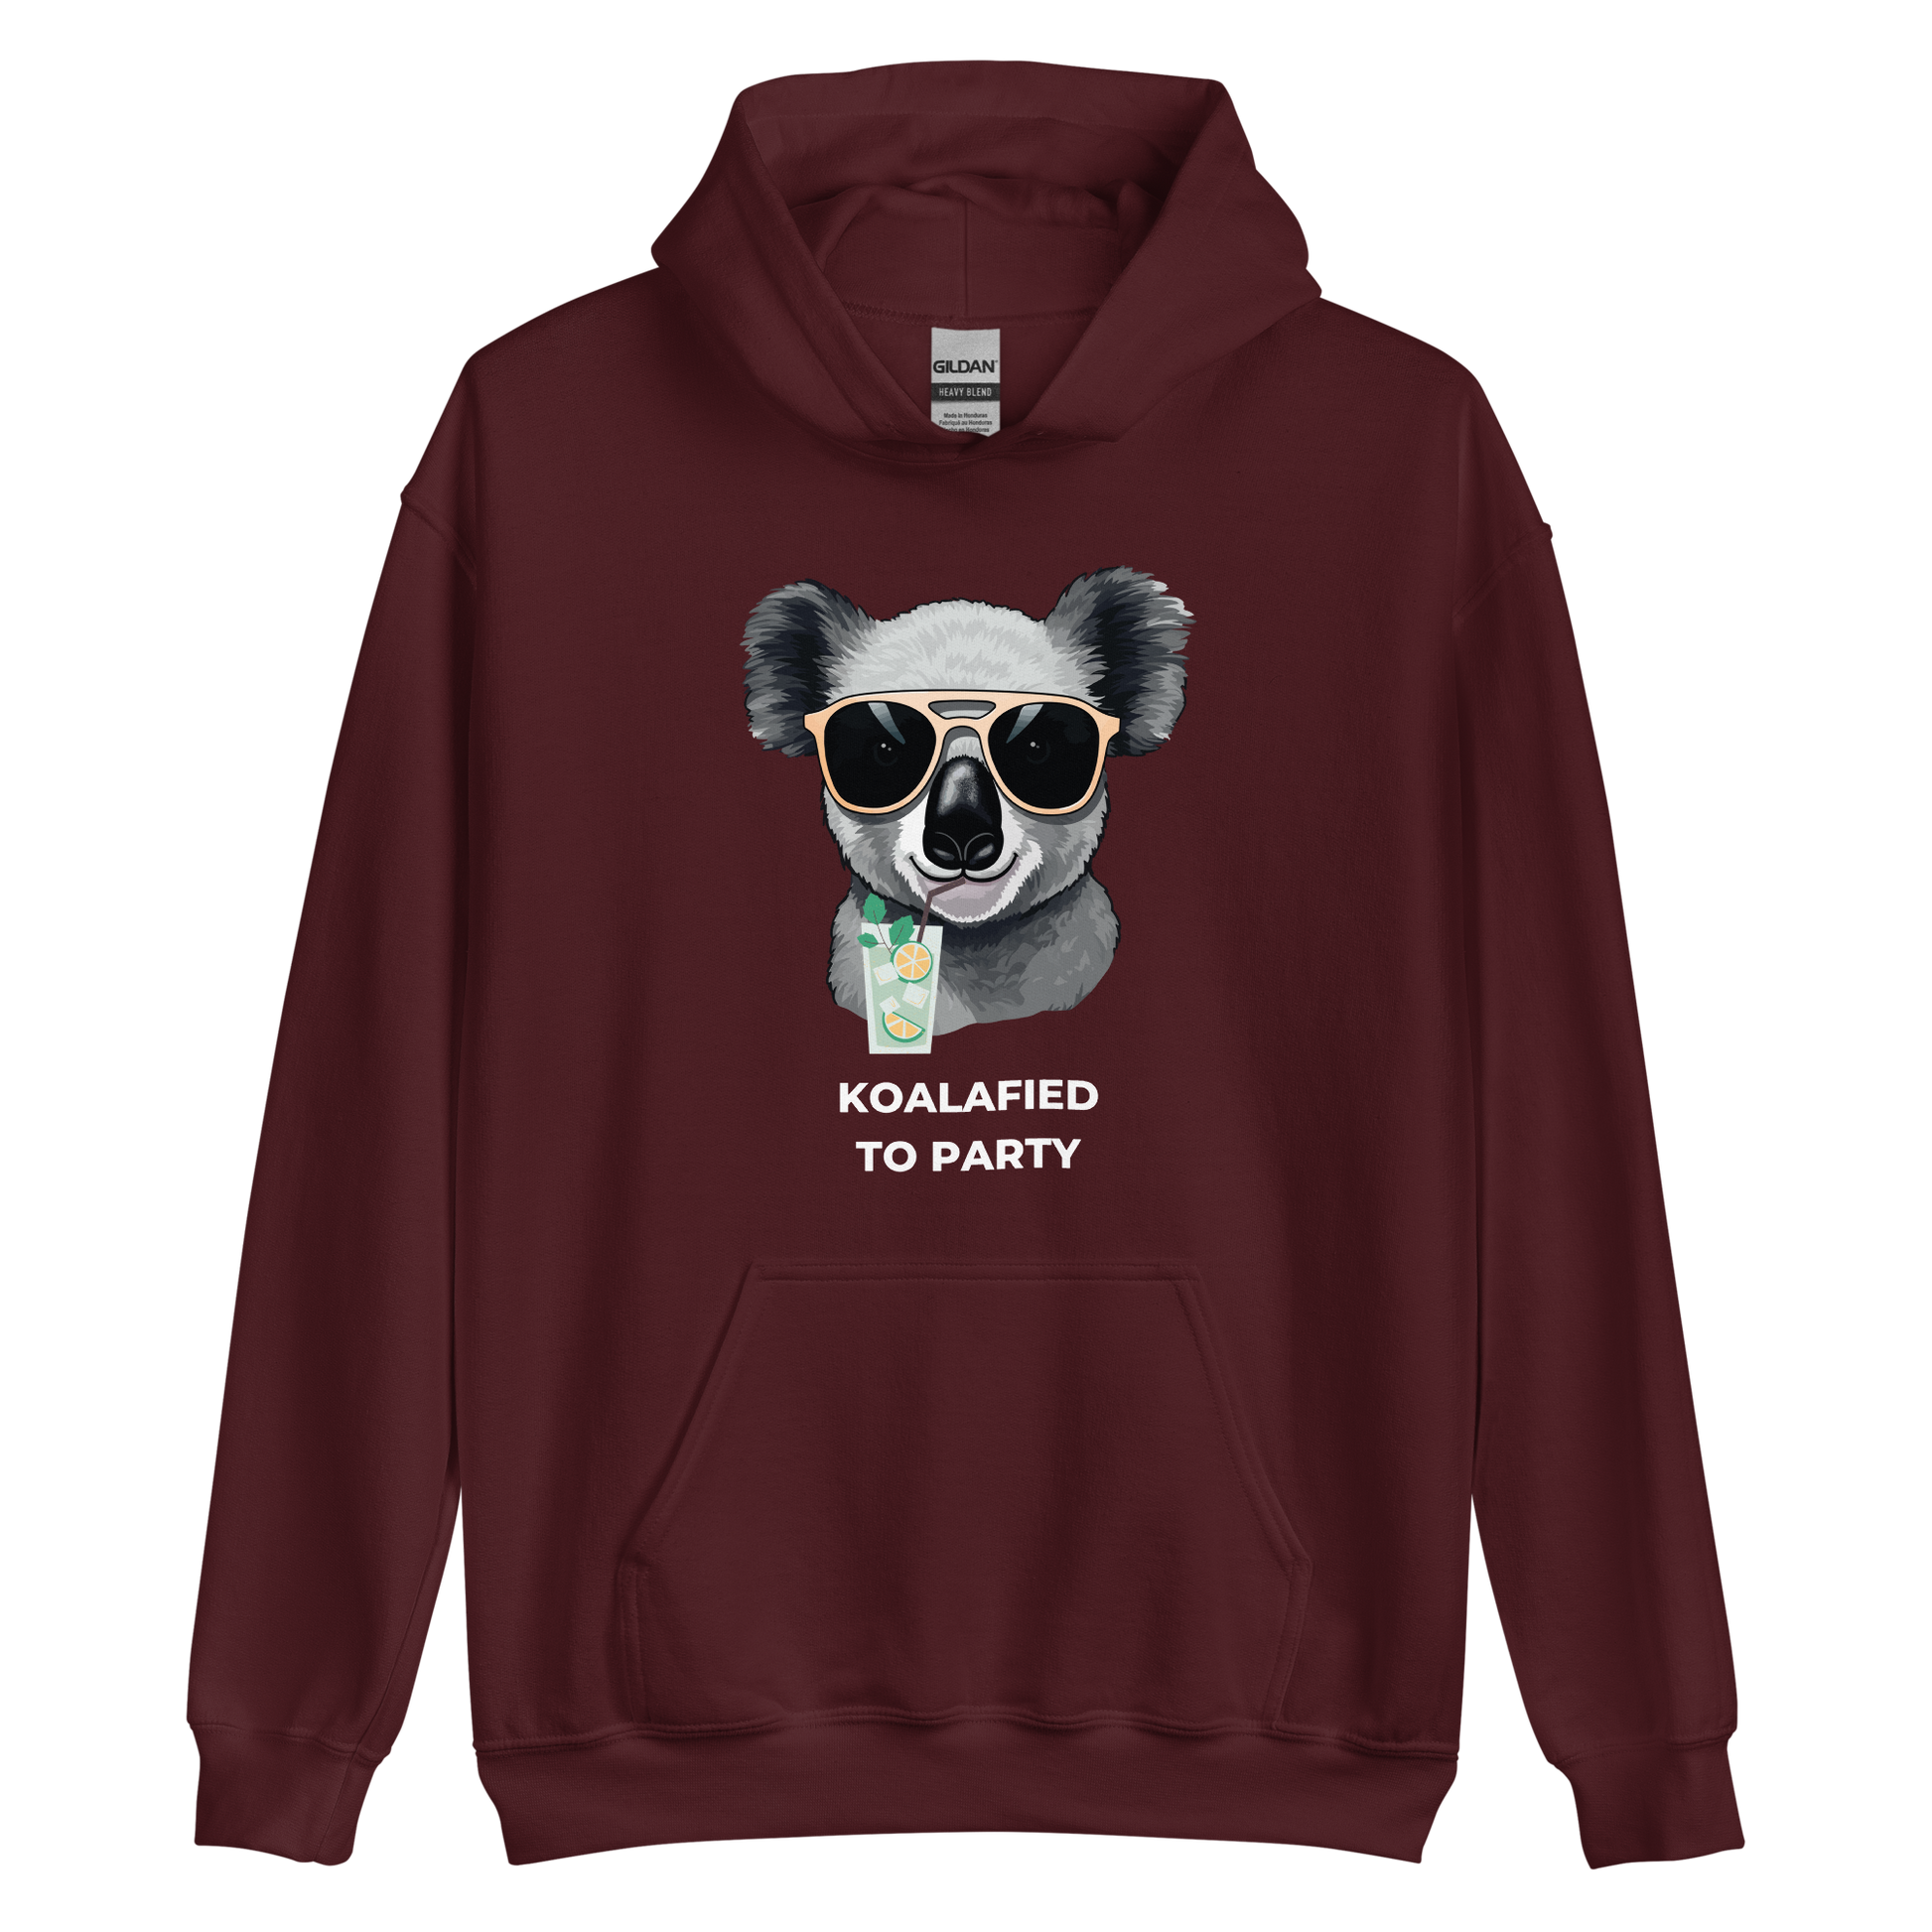 Maroon Koala Hoodie featuring a captivating Koalafied To Party graphic on the chest - Funny Graphic Koala Hoodies - Boozy Fox